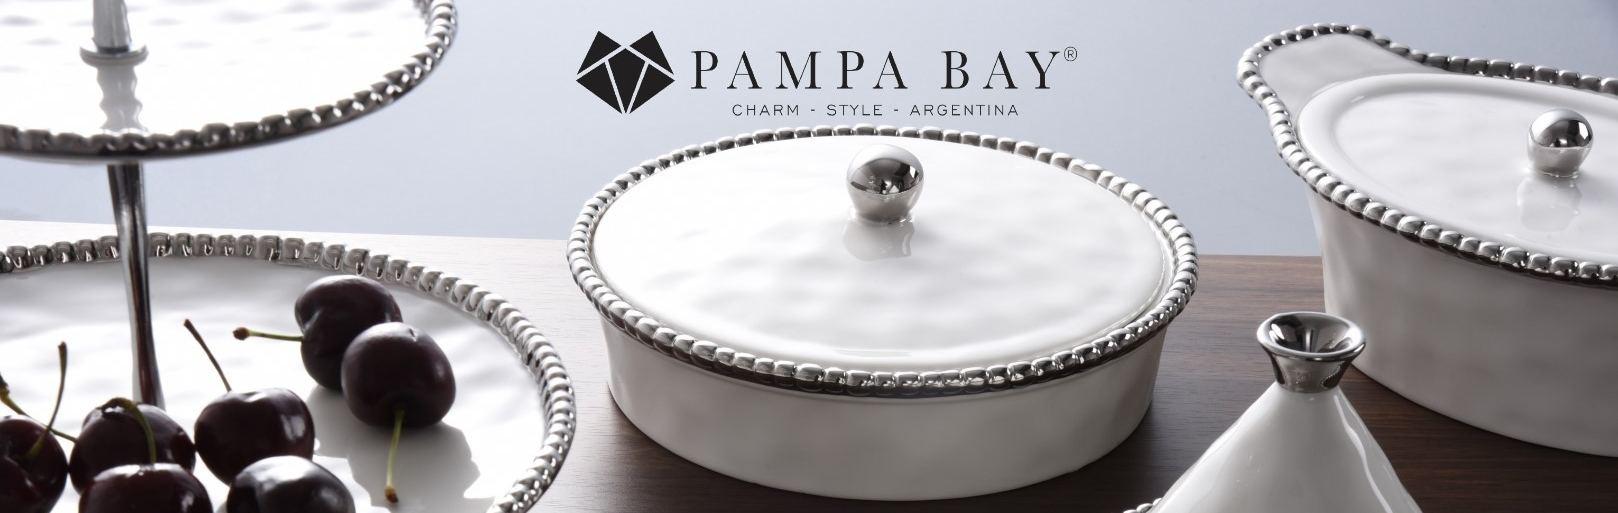 Pampa Bay lifestyle products slide 1